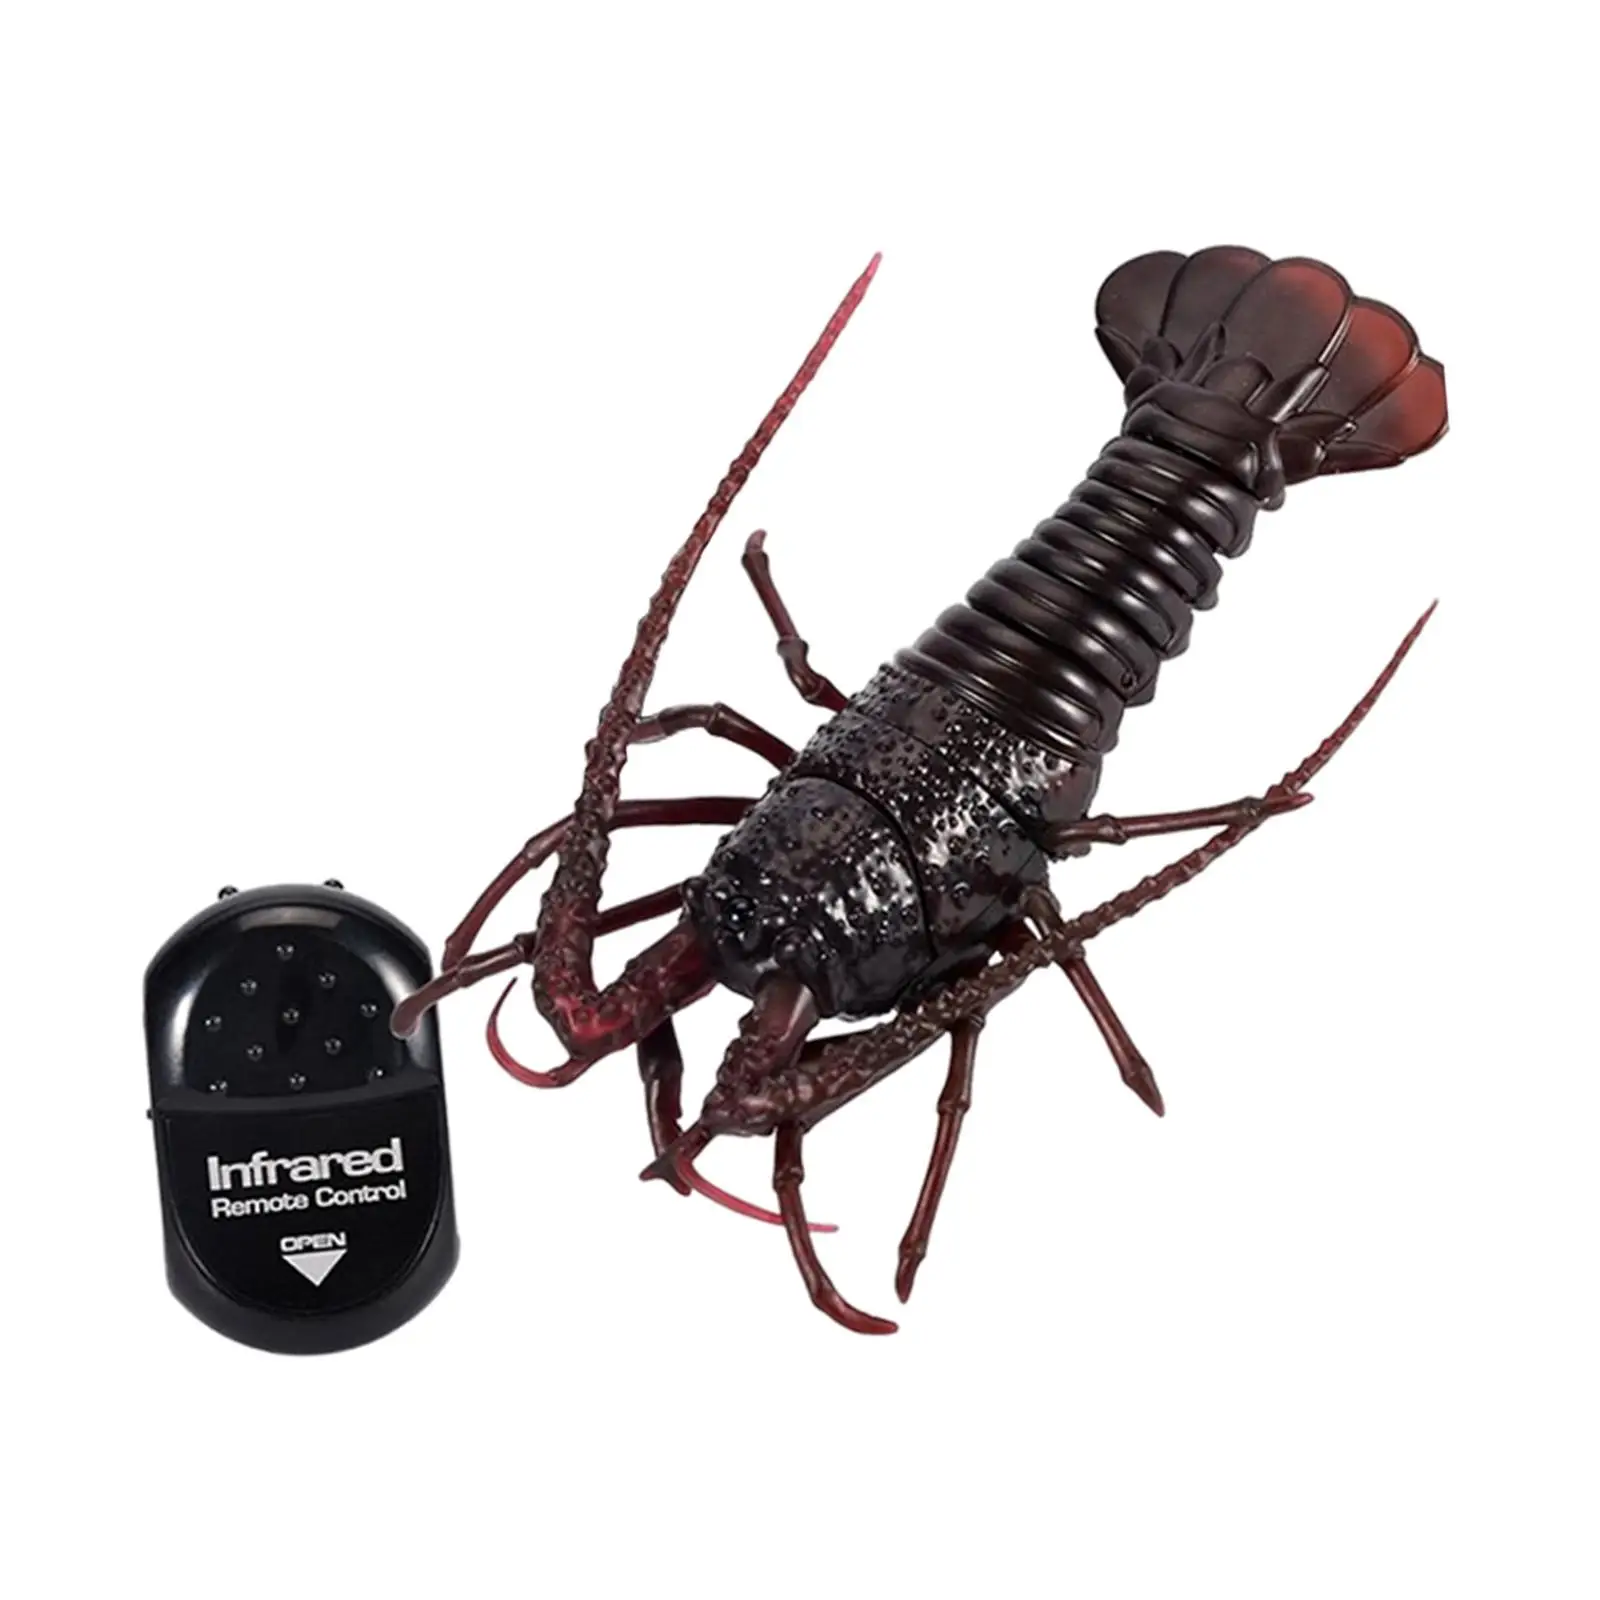 Simulation RC Crawfish Realistic Remote Control Vehicle Car Animal Pet Model Electric Infrared RC Shrimp for Kids Girls Boys